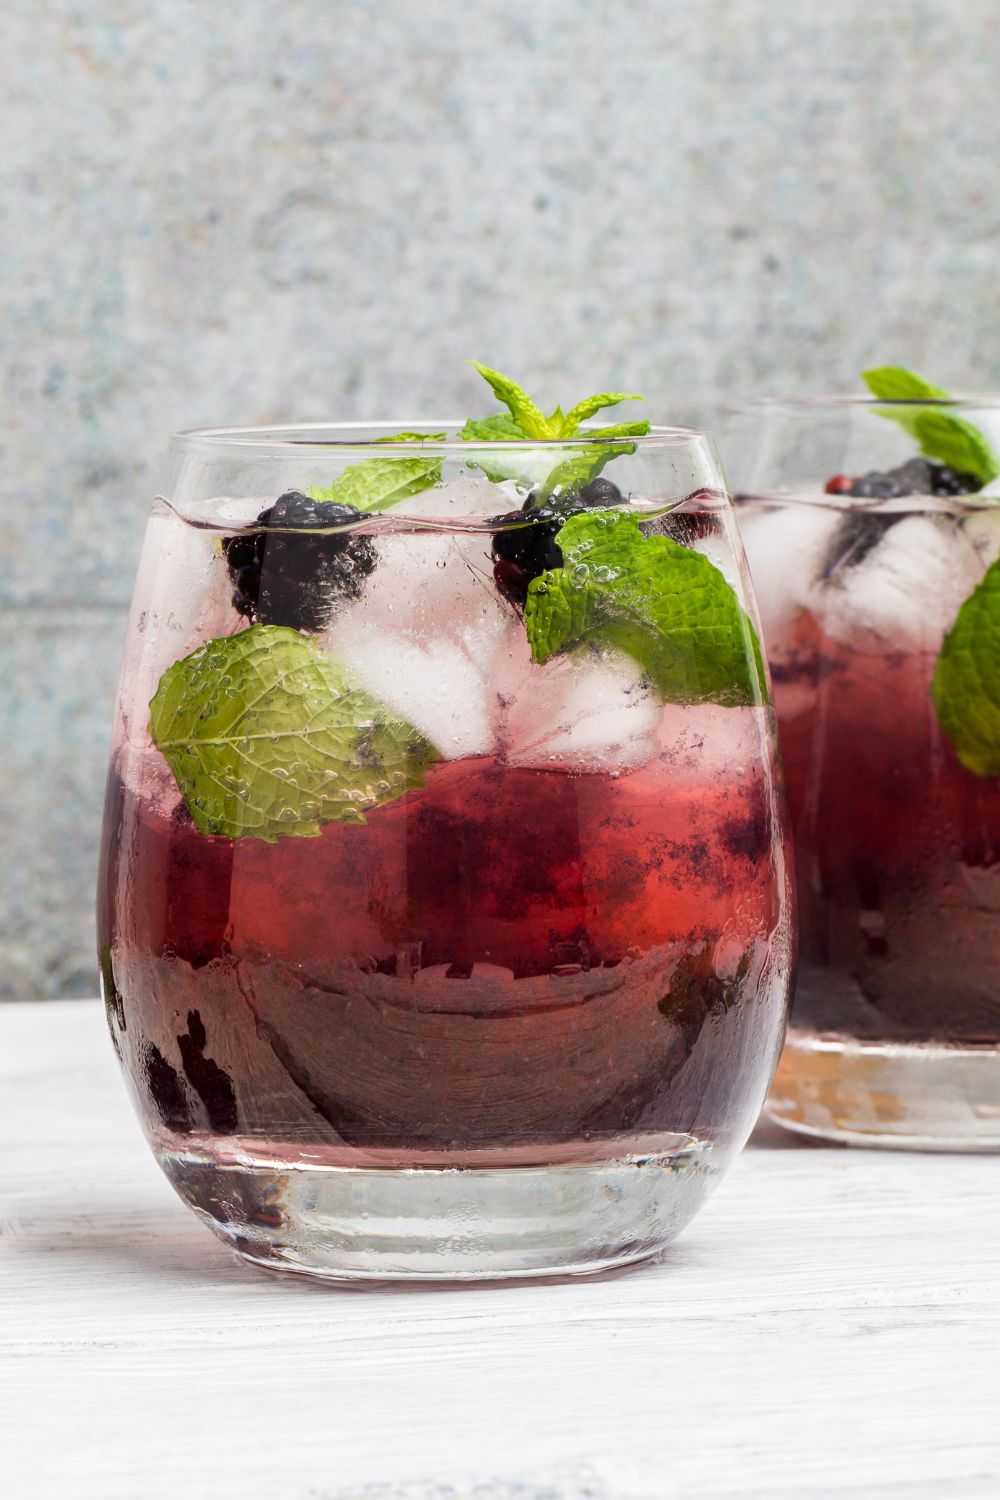 A hats off julep cocktail in a glass garnished with blackberries and mint